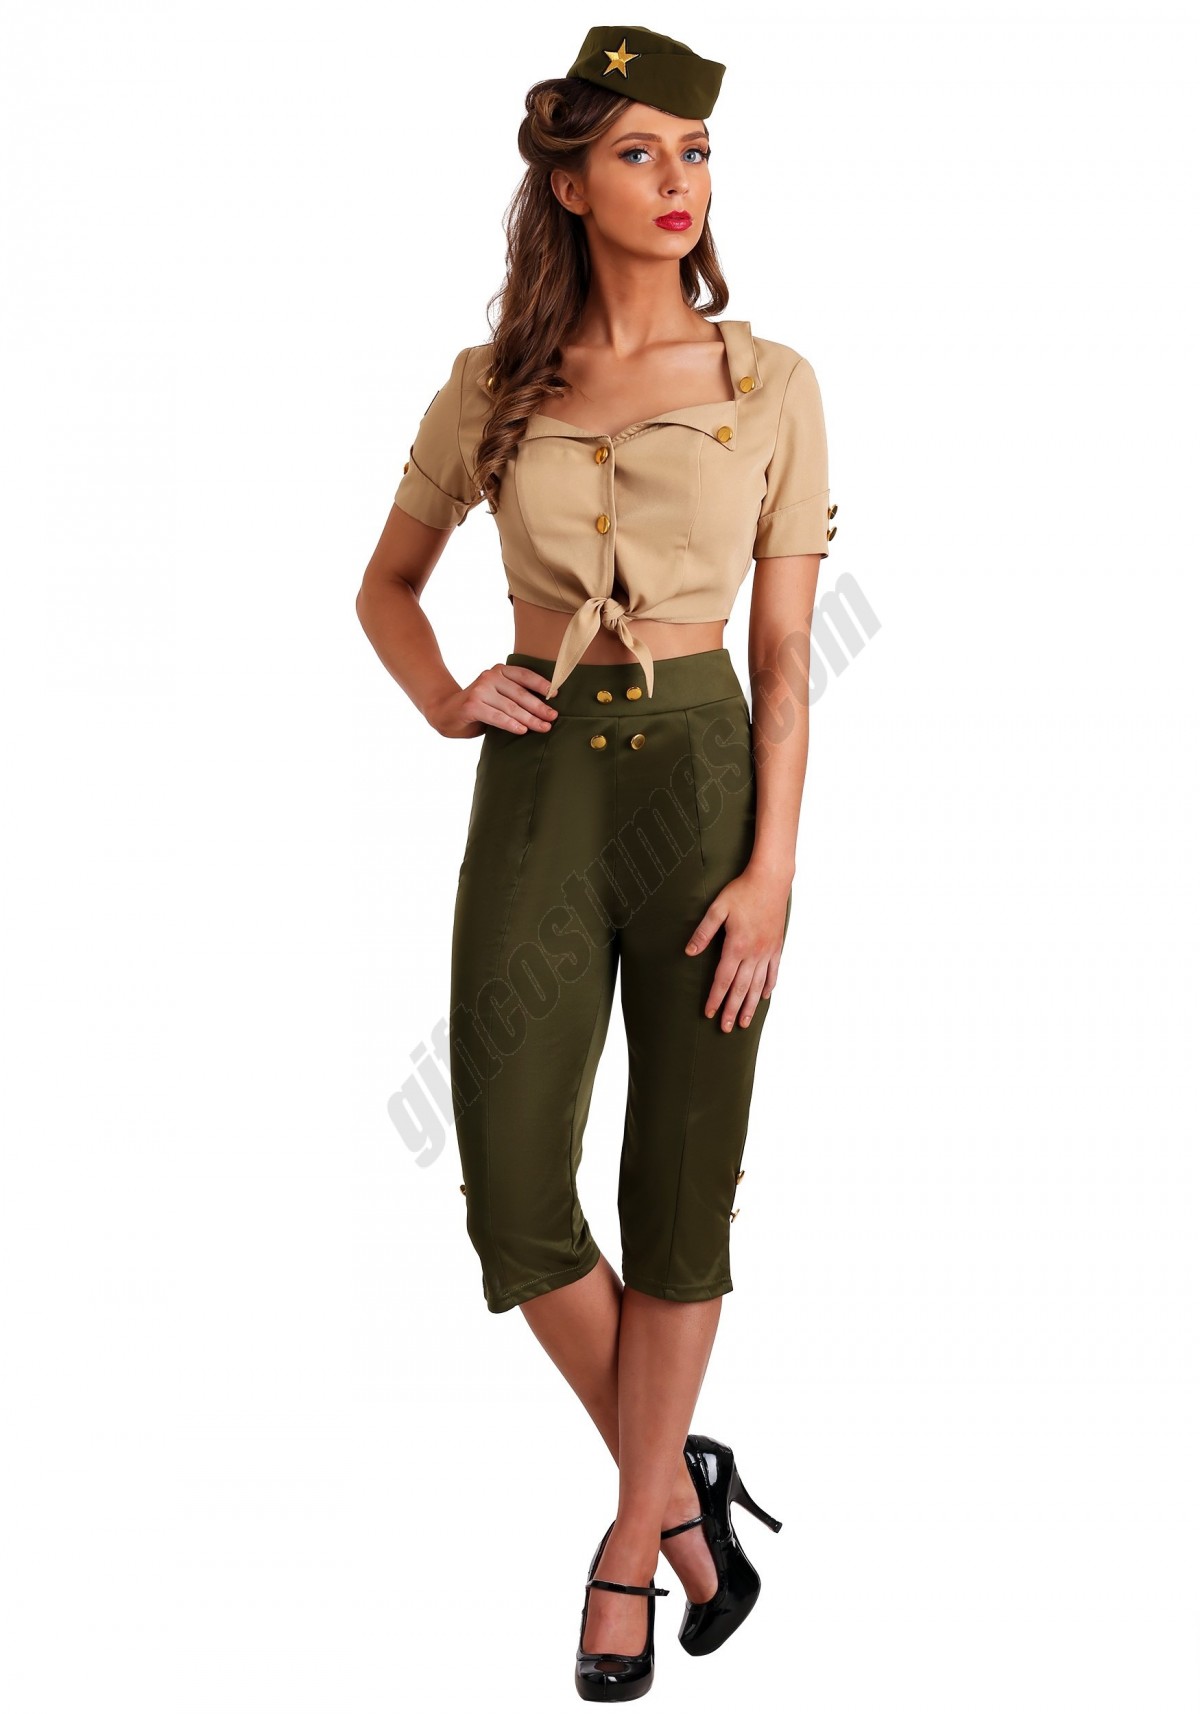 Women's Vintage Pin Up Soldier Costume - -0